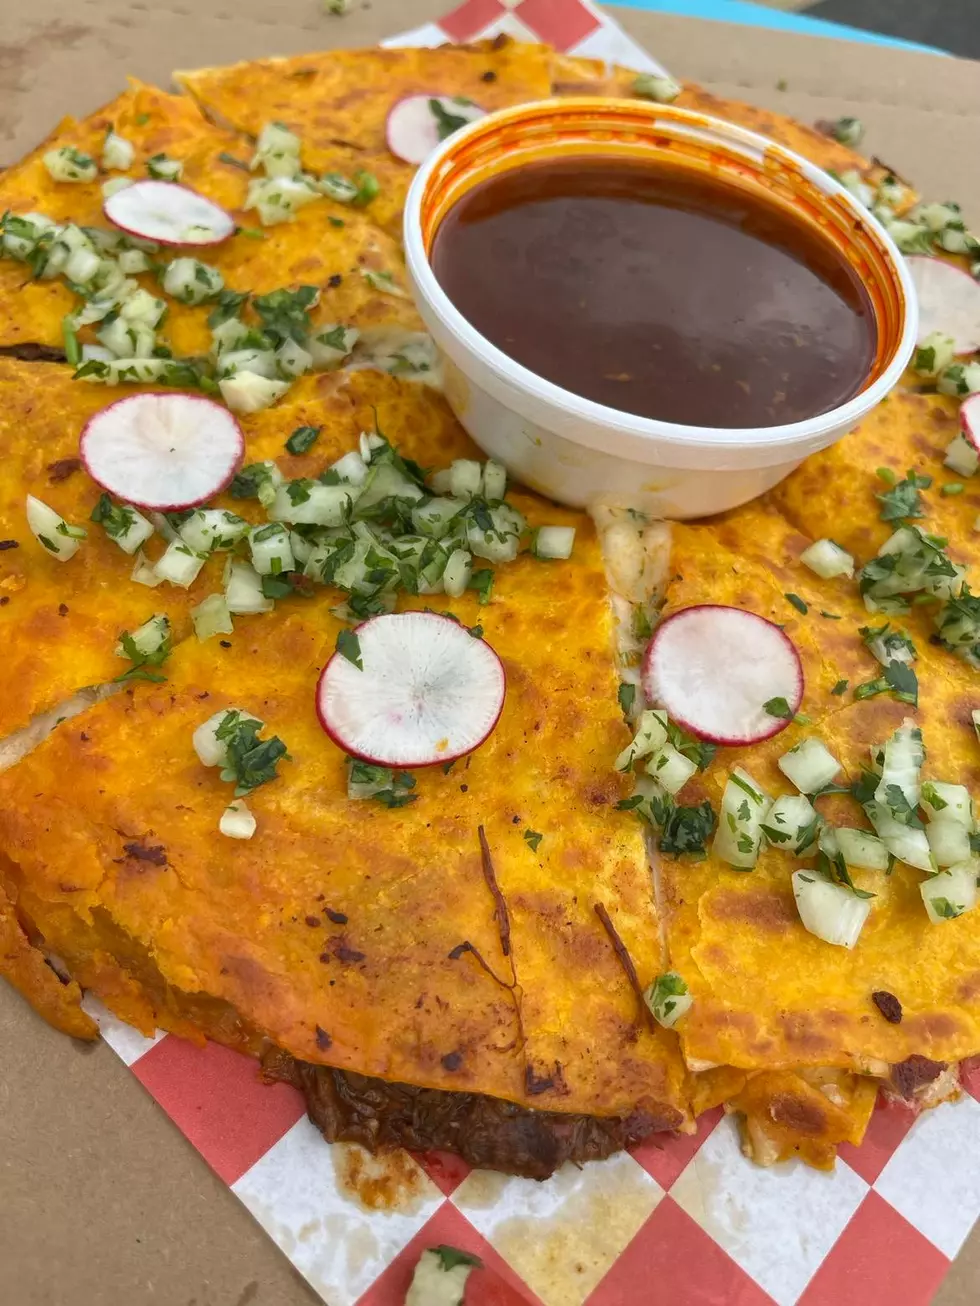 One of Illinois’ Newest Taco Trucks is Serving Up Uniquely Delicious Taco Pizza